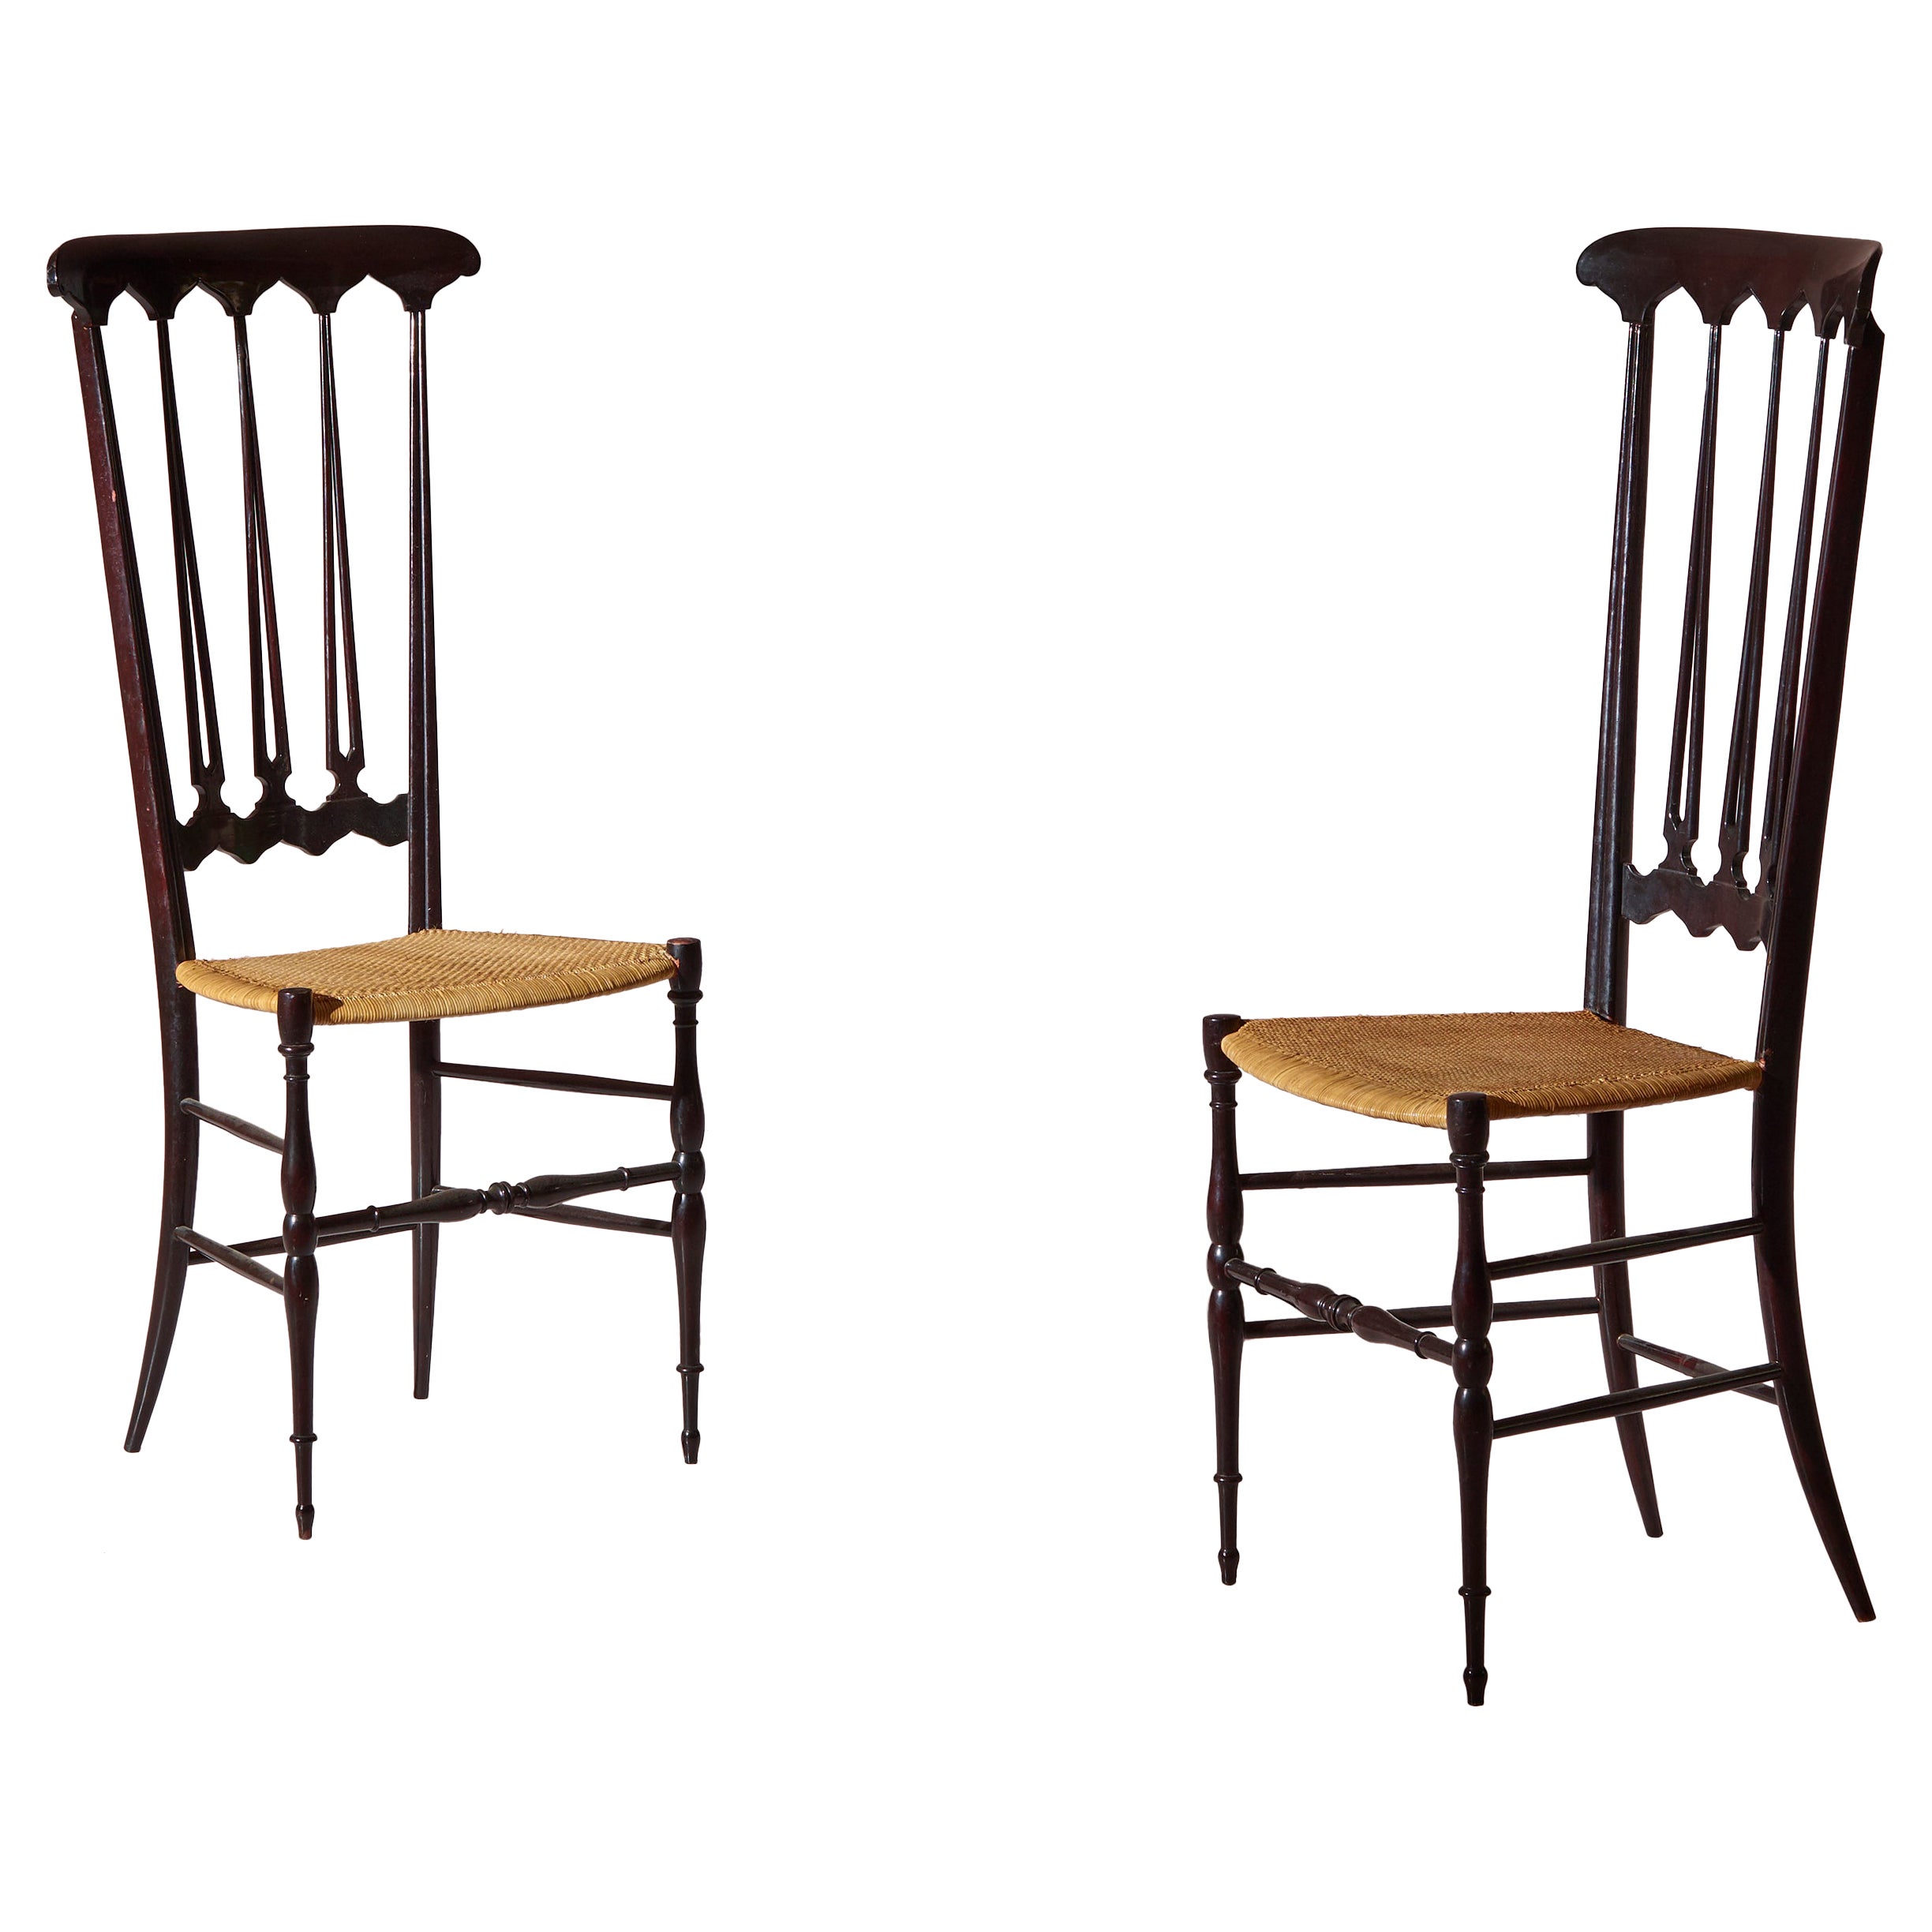 Pair of Cane and Beech ''Spade'' High Back Chairs Made in Chiavari, Italy 1960s For Sale